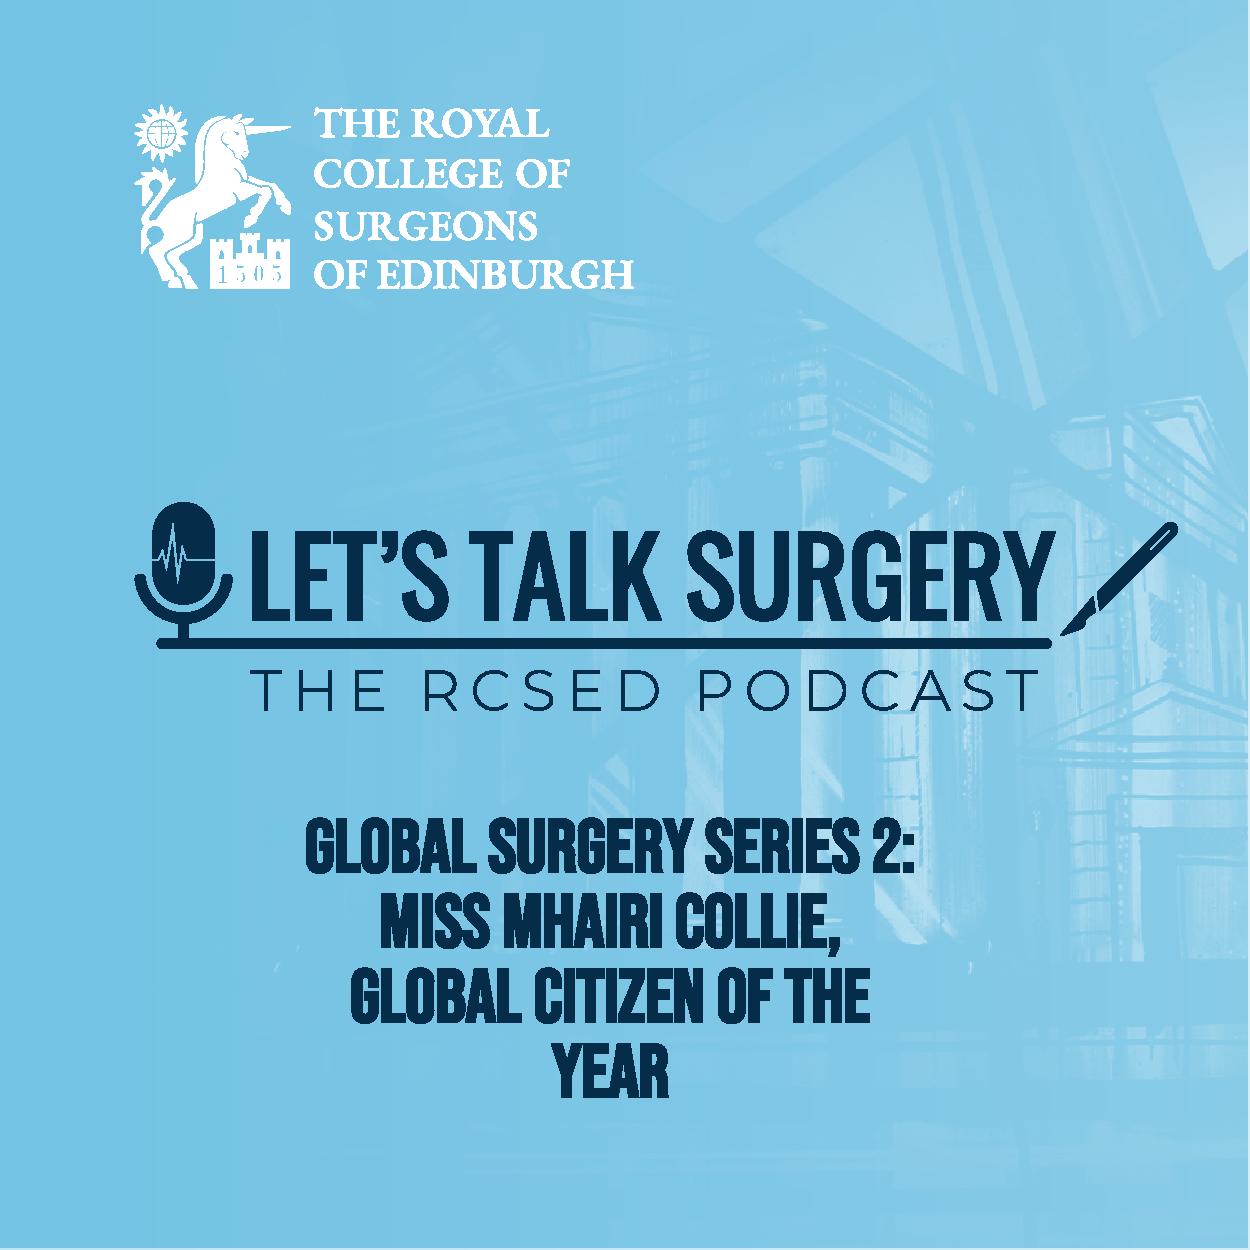 Episode #27: "Global Surgery Series 2: Miss Mhairi Collie, Global Citizen of the Year